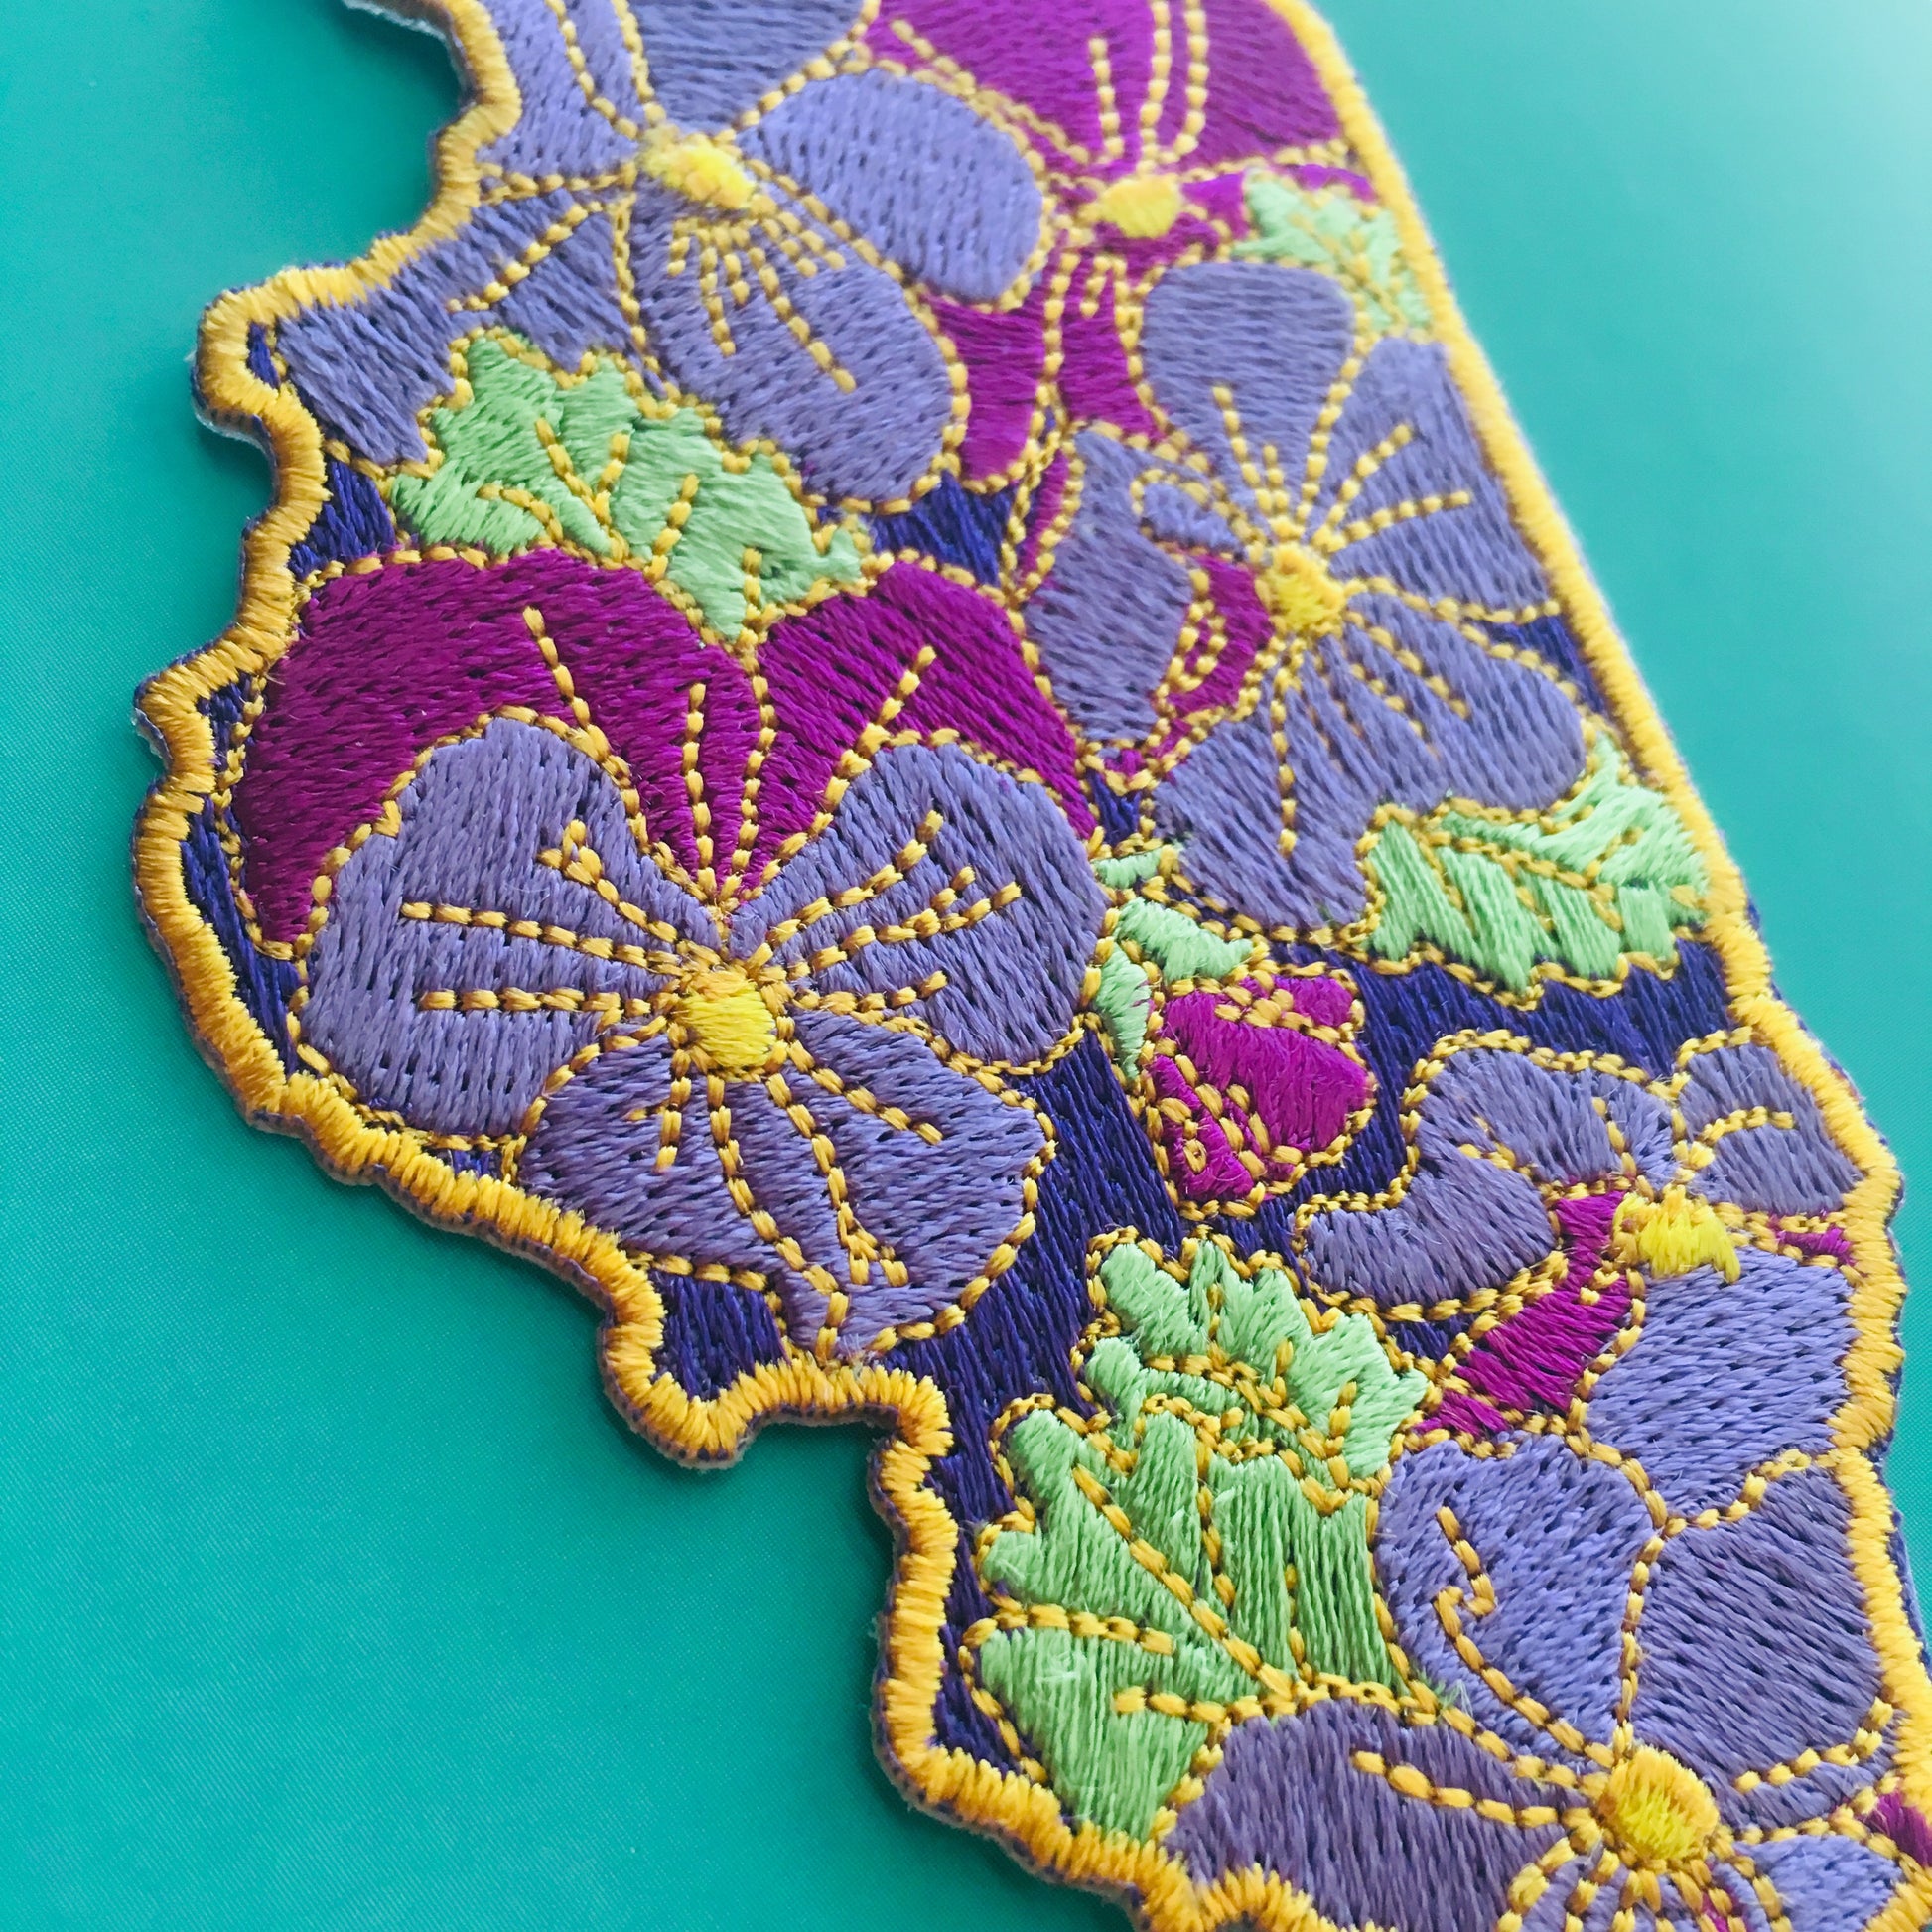 Purple Flower Patch by Ivamis Patches